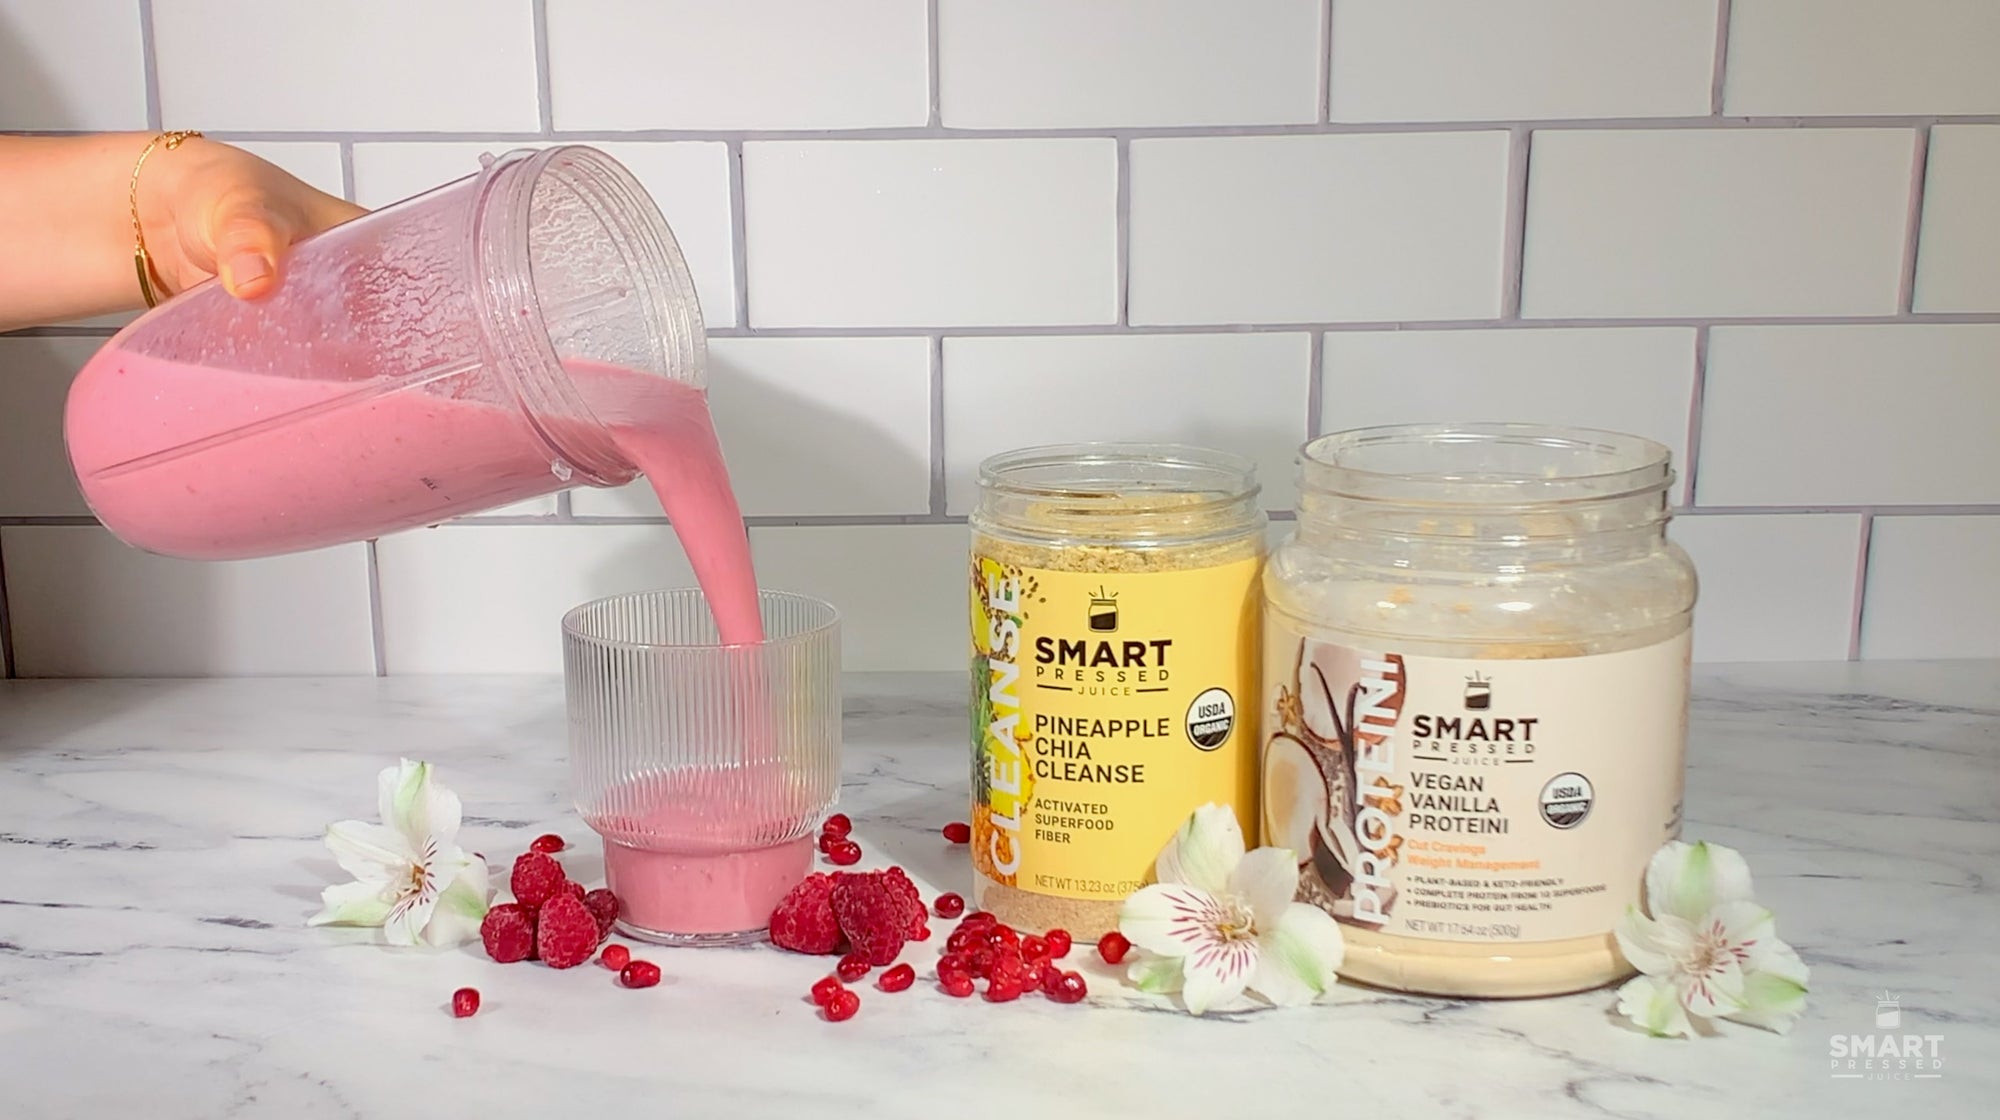 Pomegranate smoothie being poured into a glass with Pineapple Chia Cleanse and Vegan Vanilla Proteini next to the glass on a subway tile background